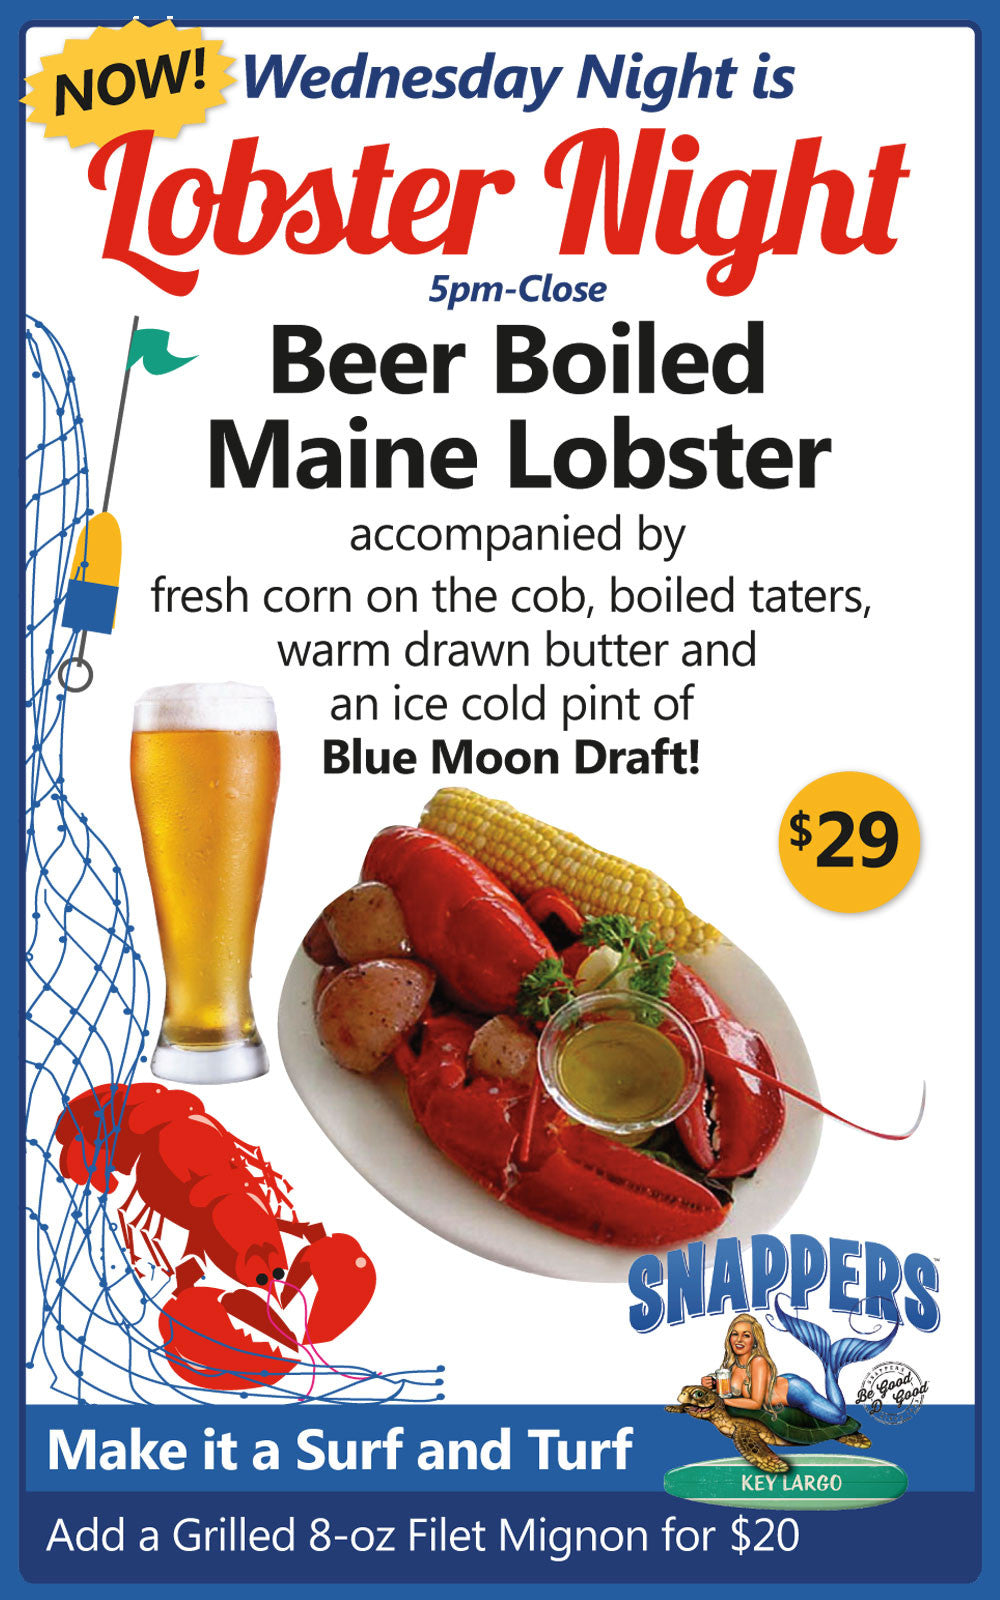 Wednesday is Lobster Night